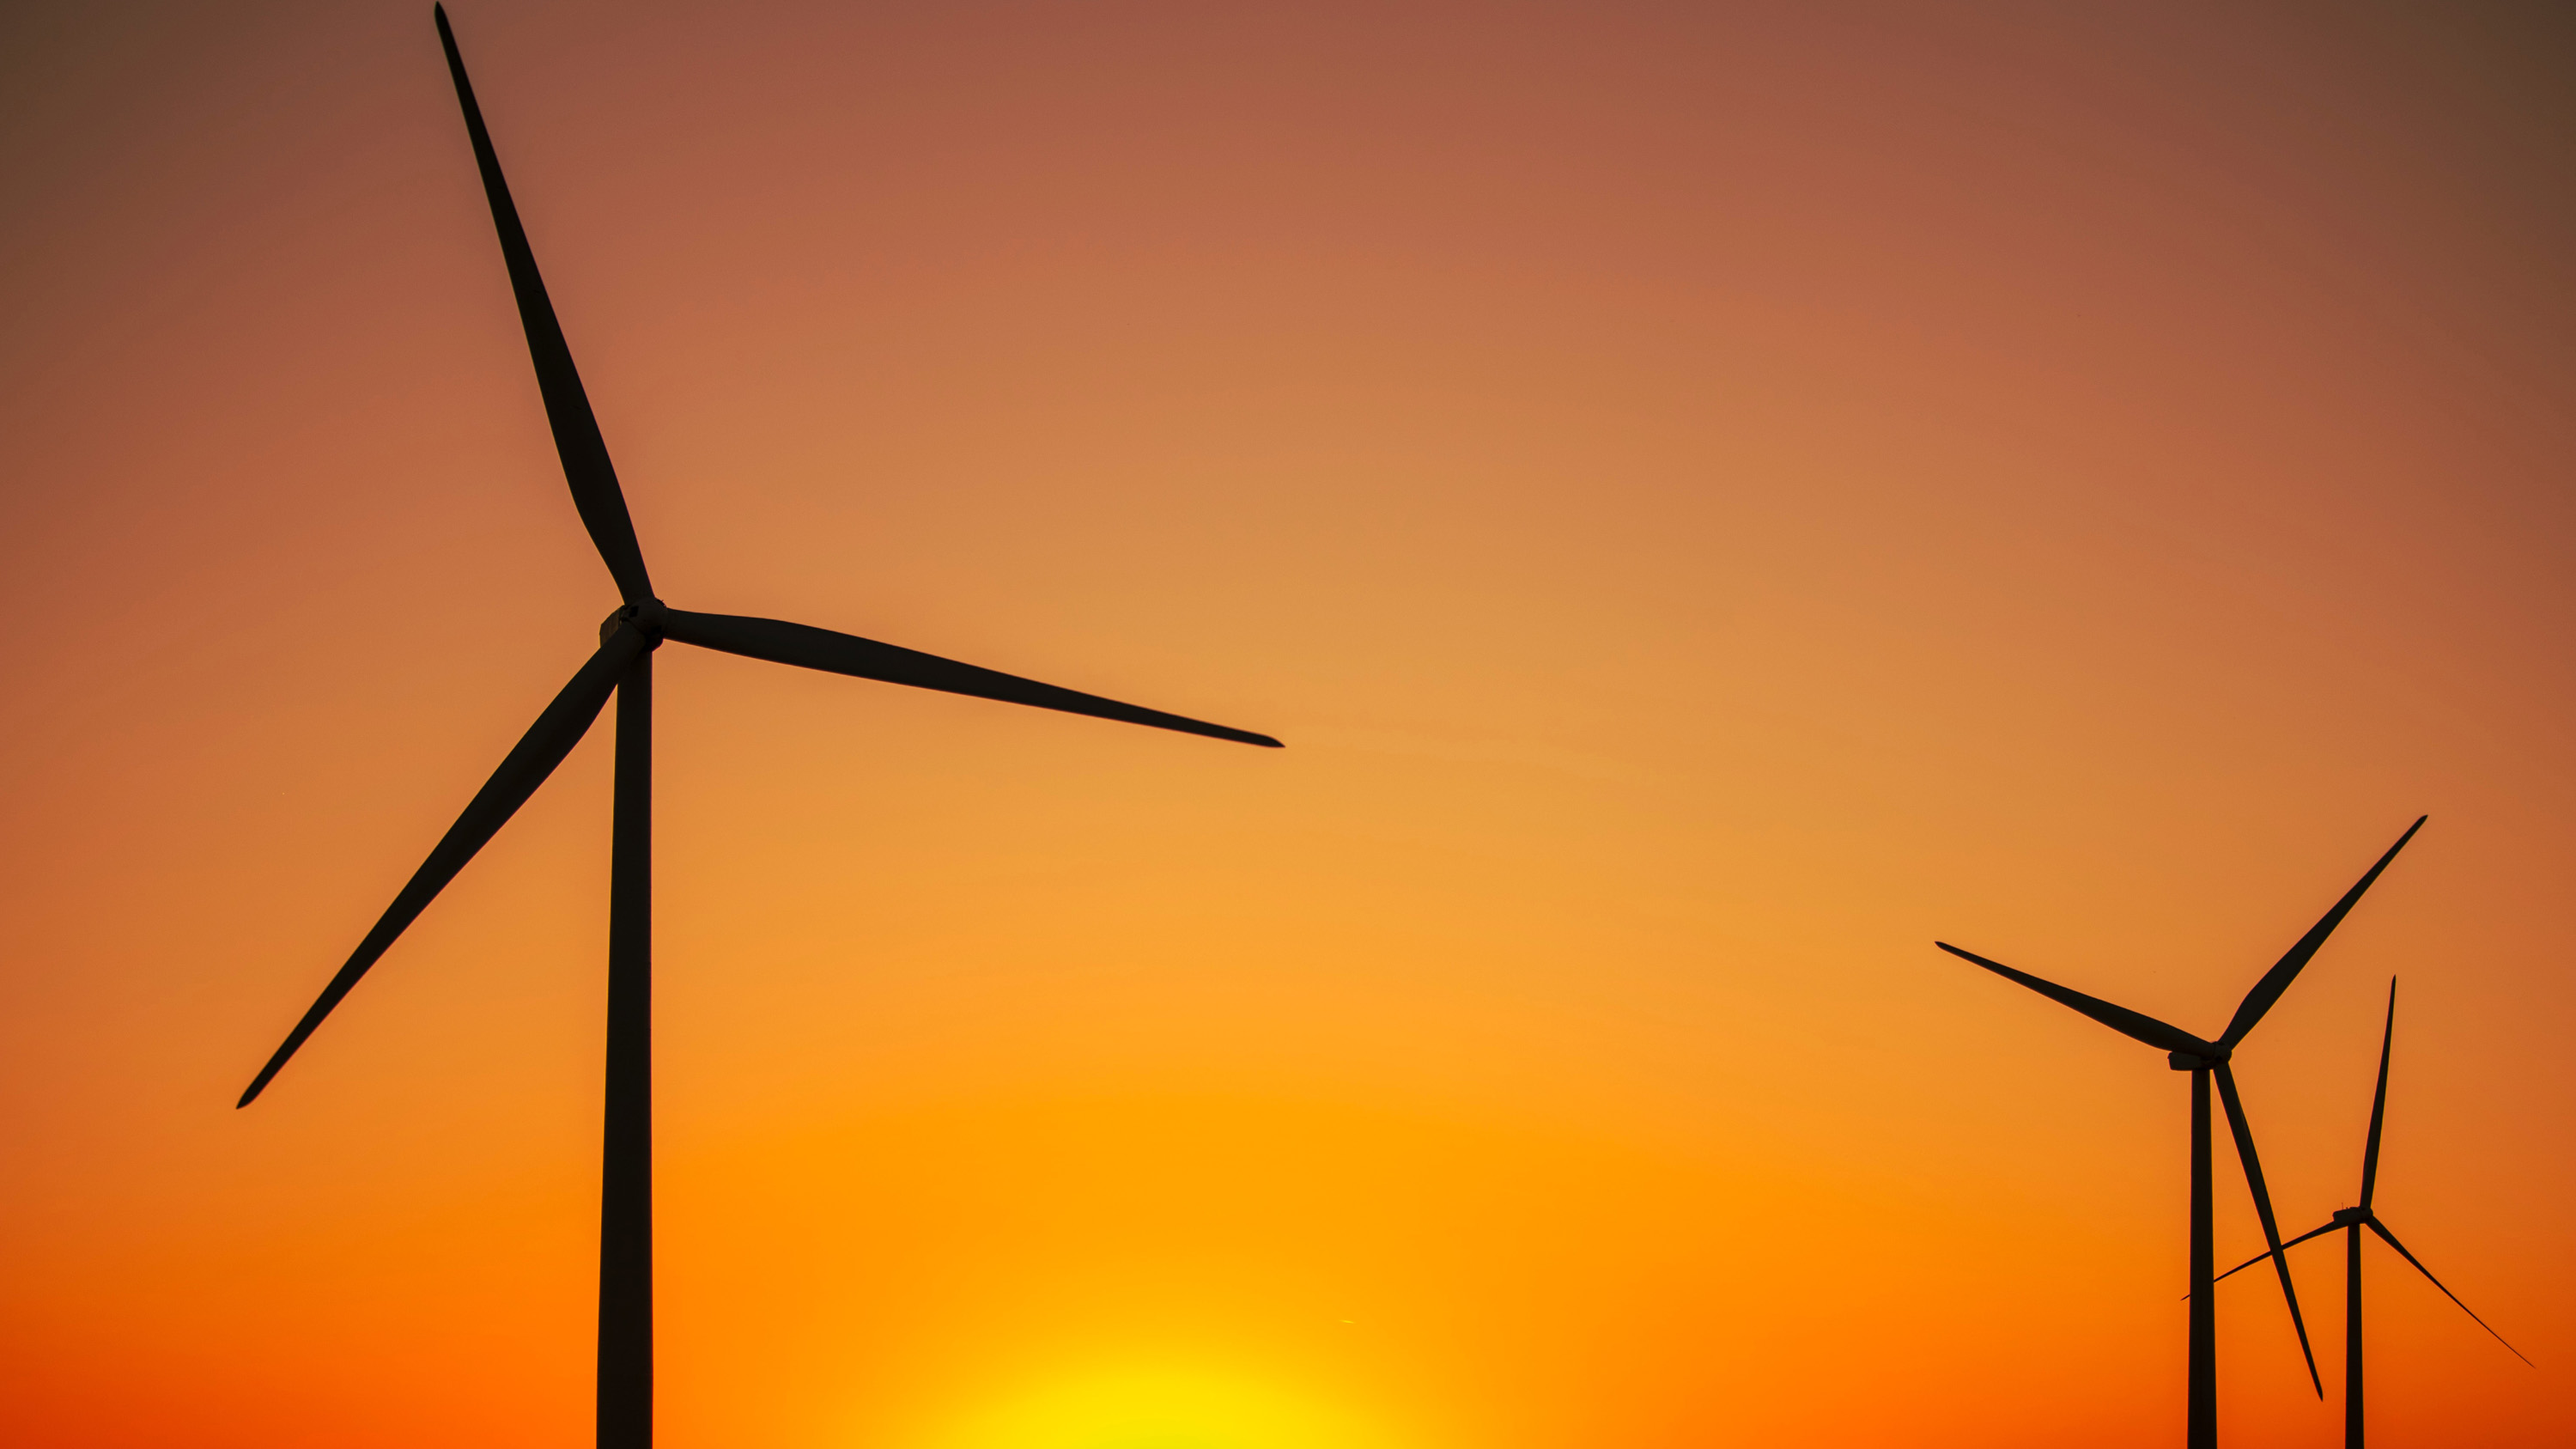 wind turbines in silhouette against the setting sun